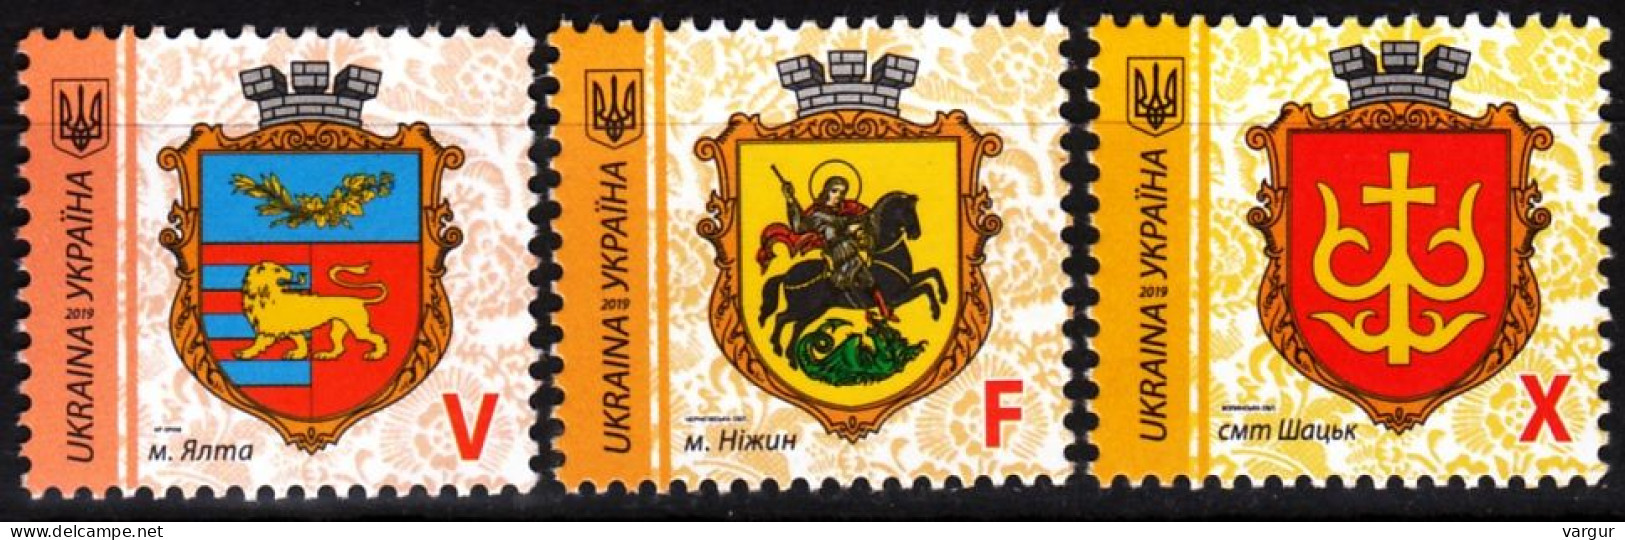 UKRAINE 2019-13 Definitive: Heraldry City Arms, 3v. Re-printing. Issues 1 & 2, MNH - Timbres